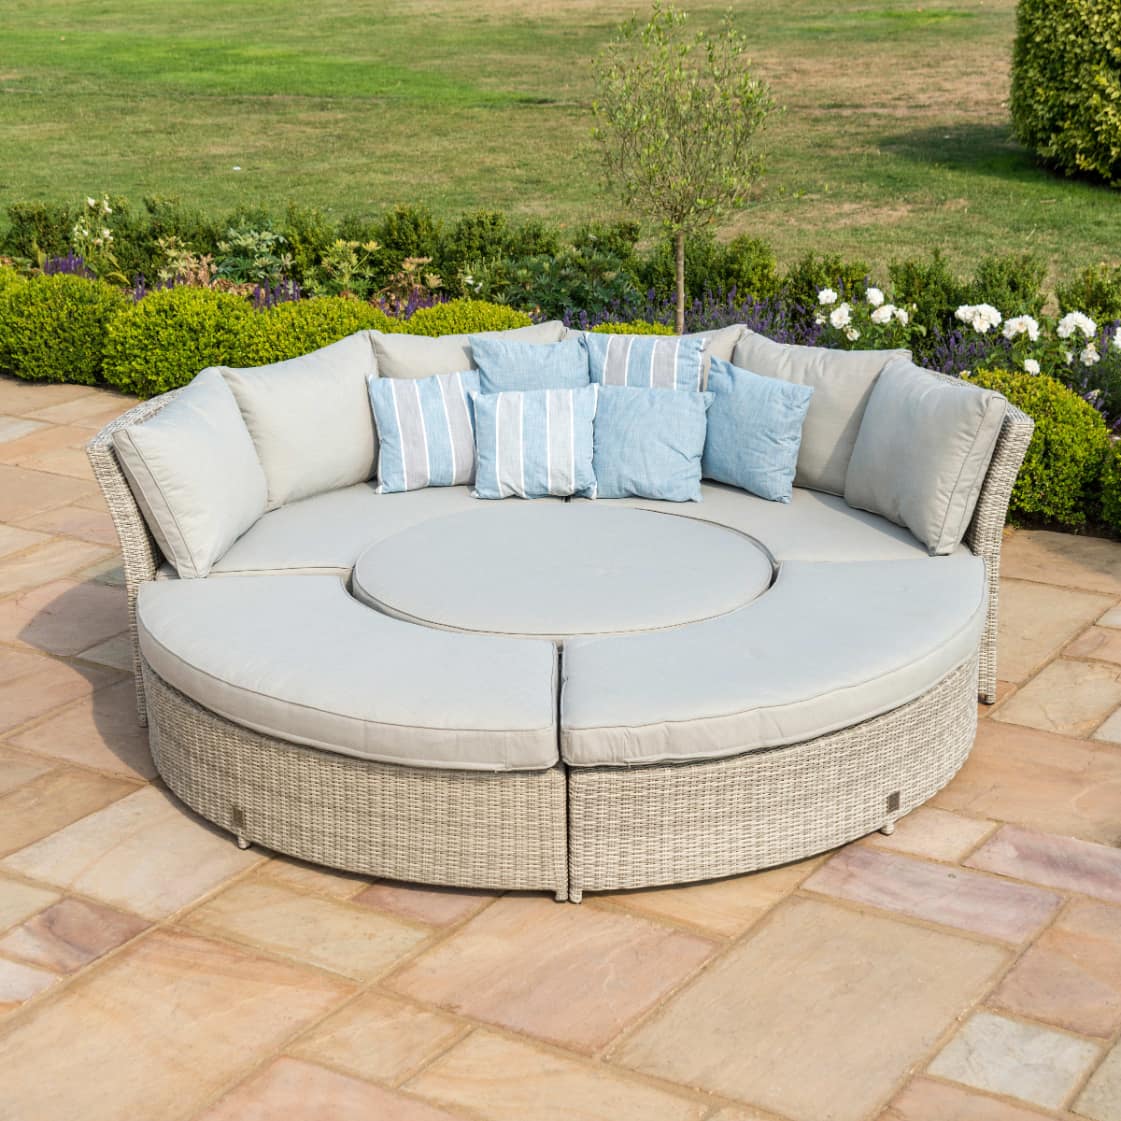 Light grey rattan lifestyle suite with a curved sofa, curved bench and a rising table - pushed together as a day bed